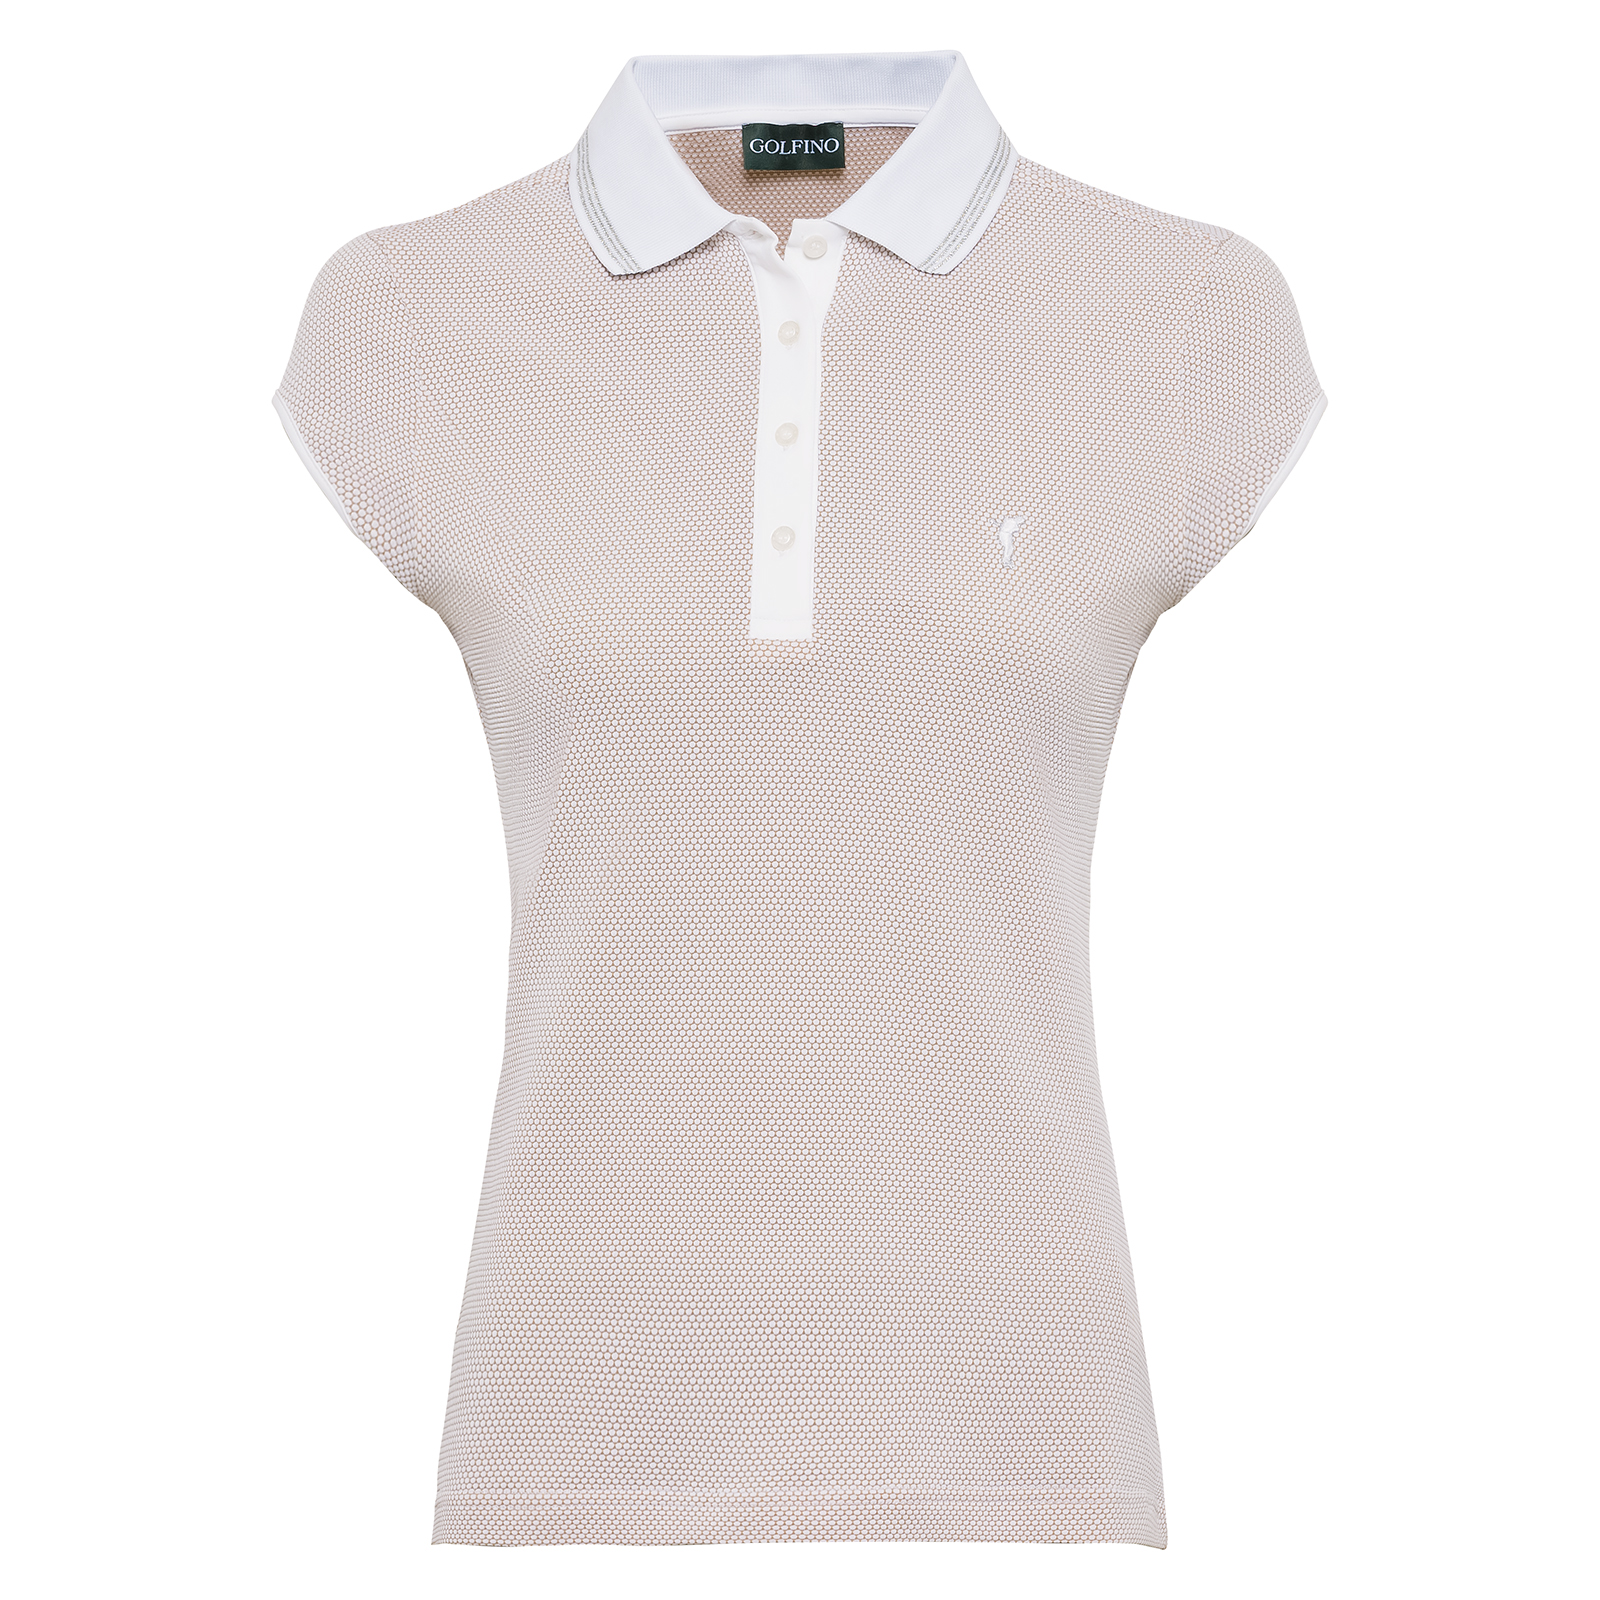 Ladies' golf polo shirt with cap sleeves, made from high quality bubble Jacquard fabric